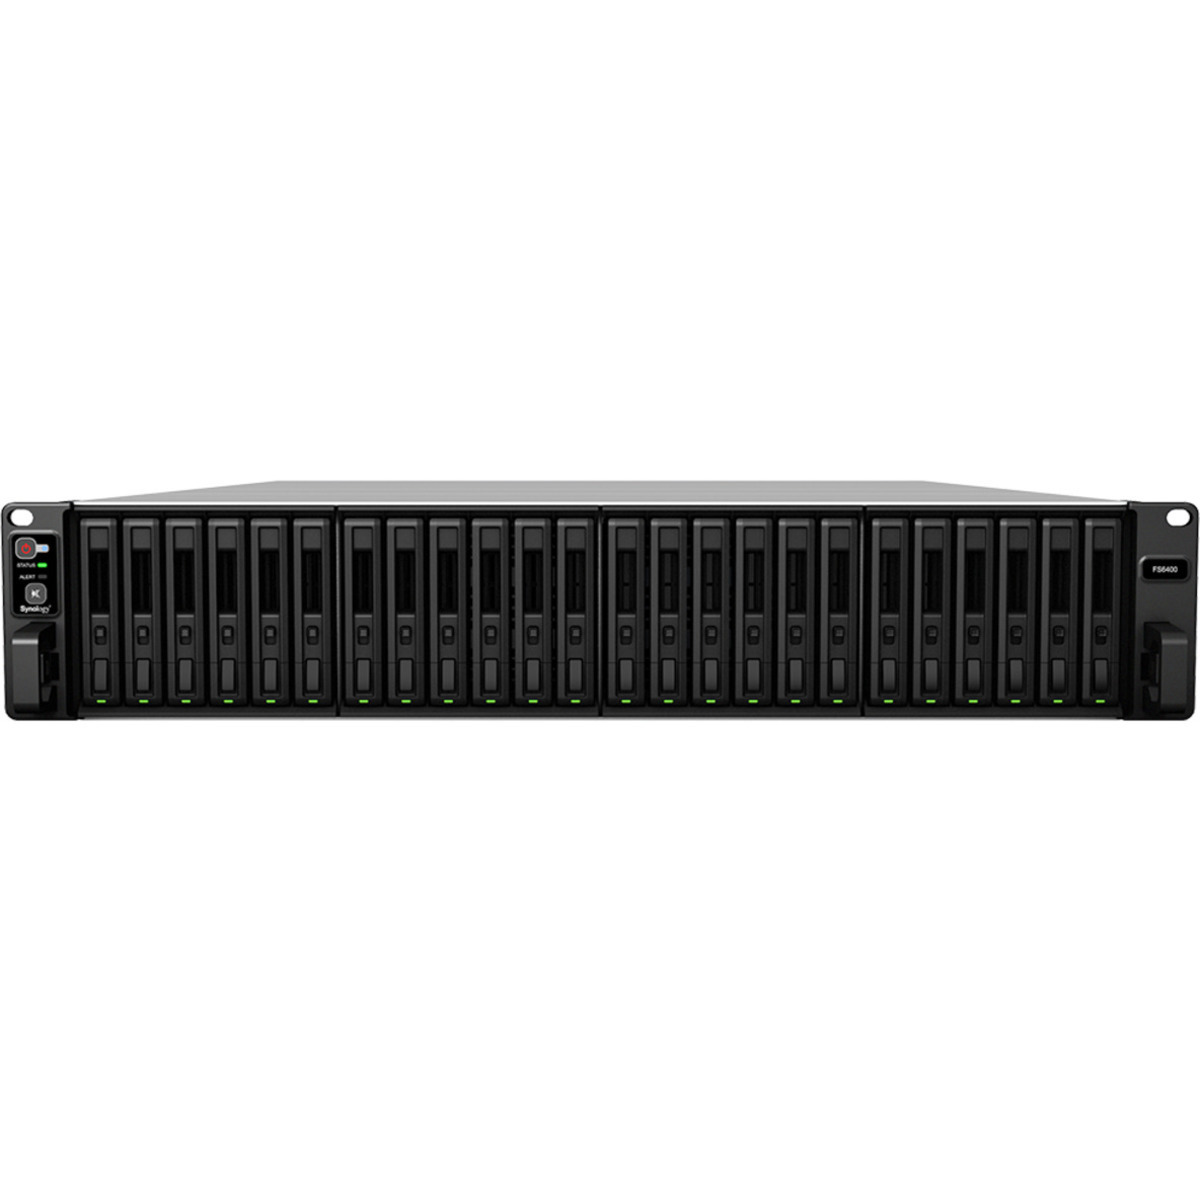 Synology FlashStation FS6400 44tb 24-Bay RackMount Large Business / Enterprise NAS - Network Attached Storage Device 22x2tb Crucial MX500 CT2000MX500SSD1 2.5 560/510MB/s SATA 6Gb/s SSD CONSUMER Class Drives Installed - Burn-In Tested FlashStation FS6400